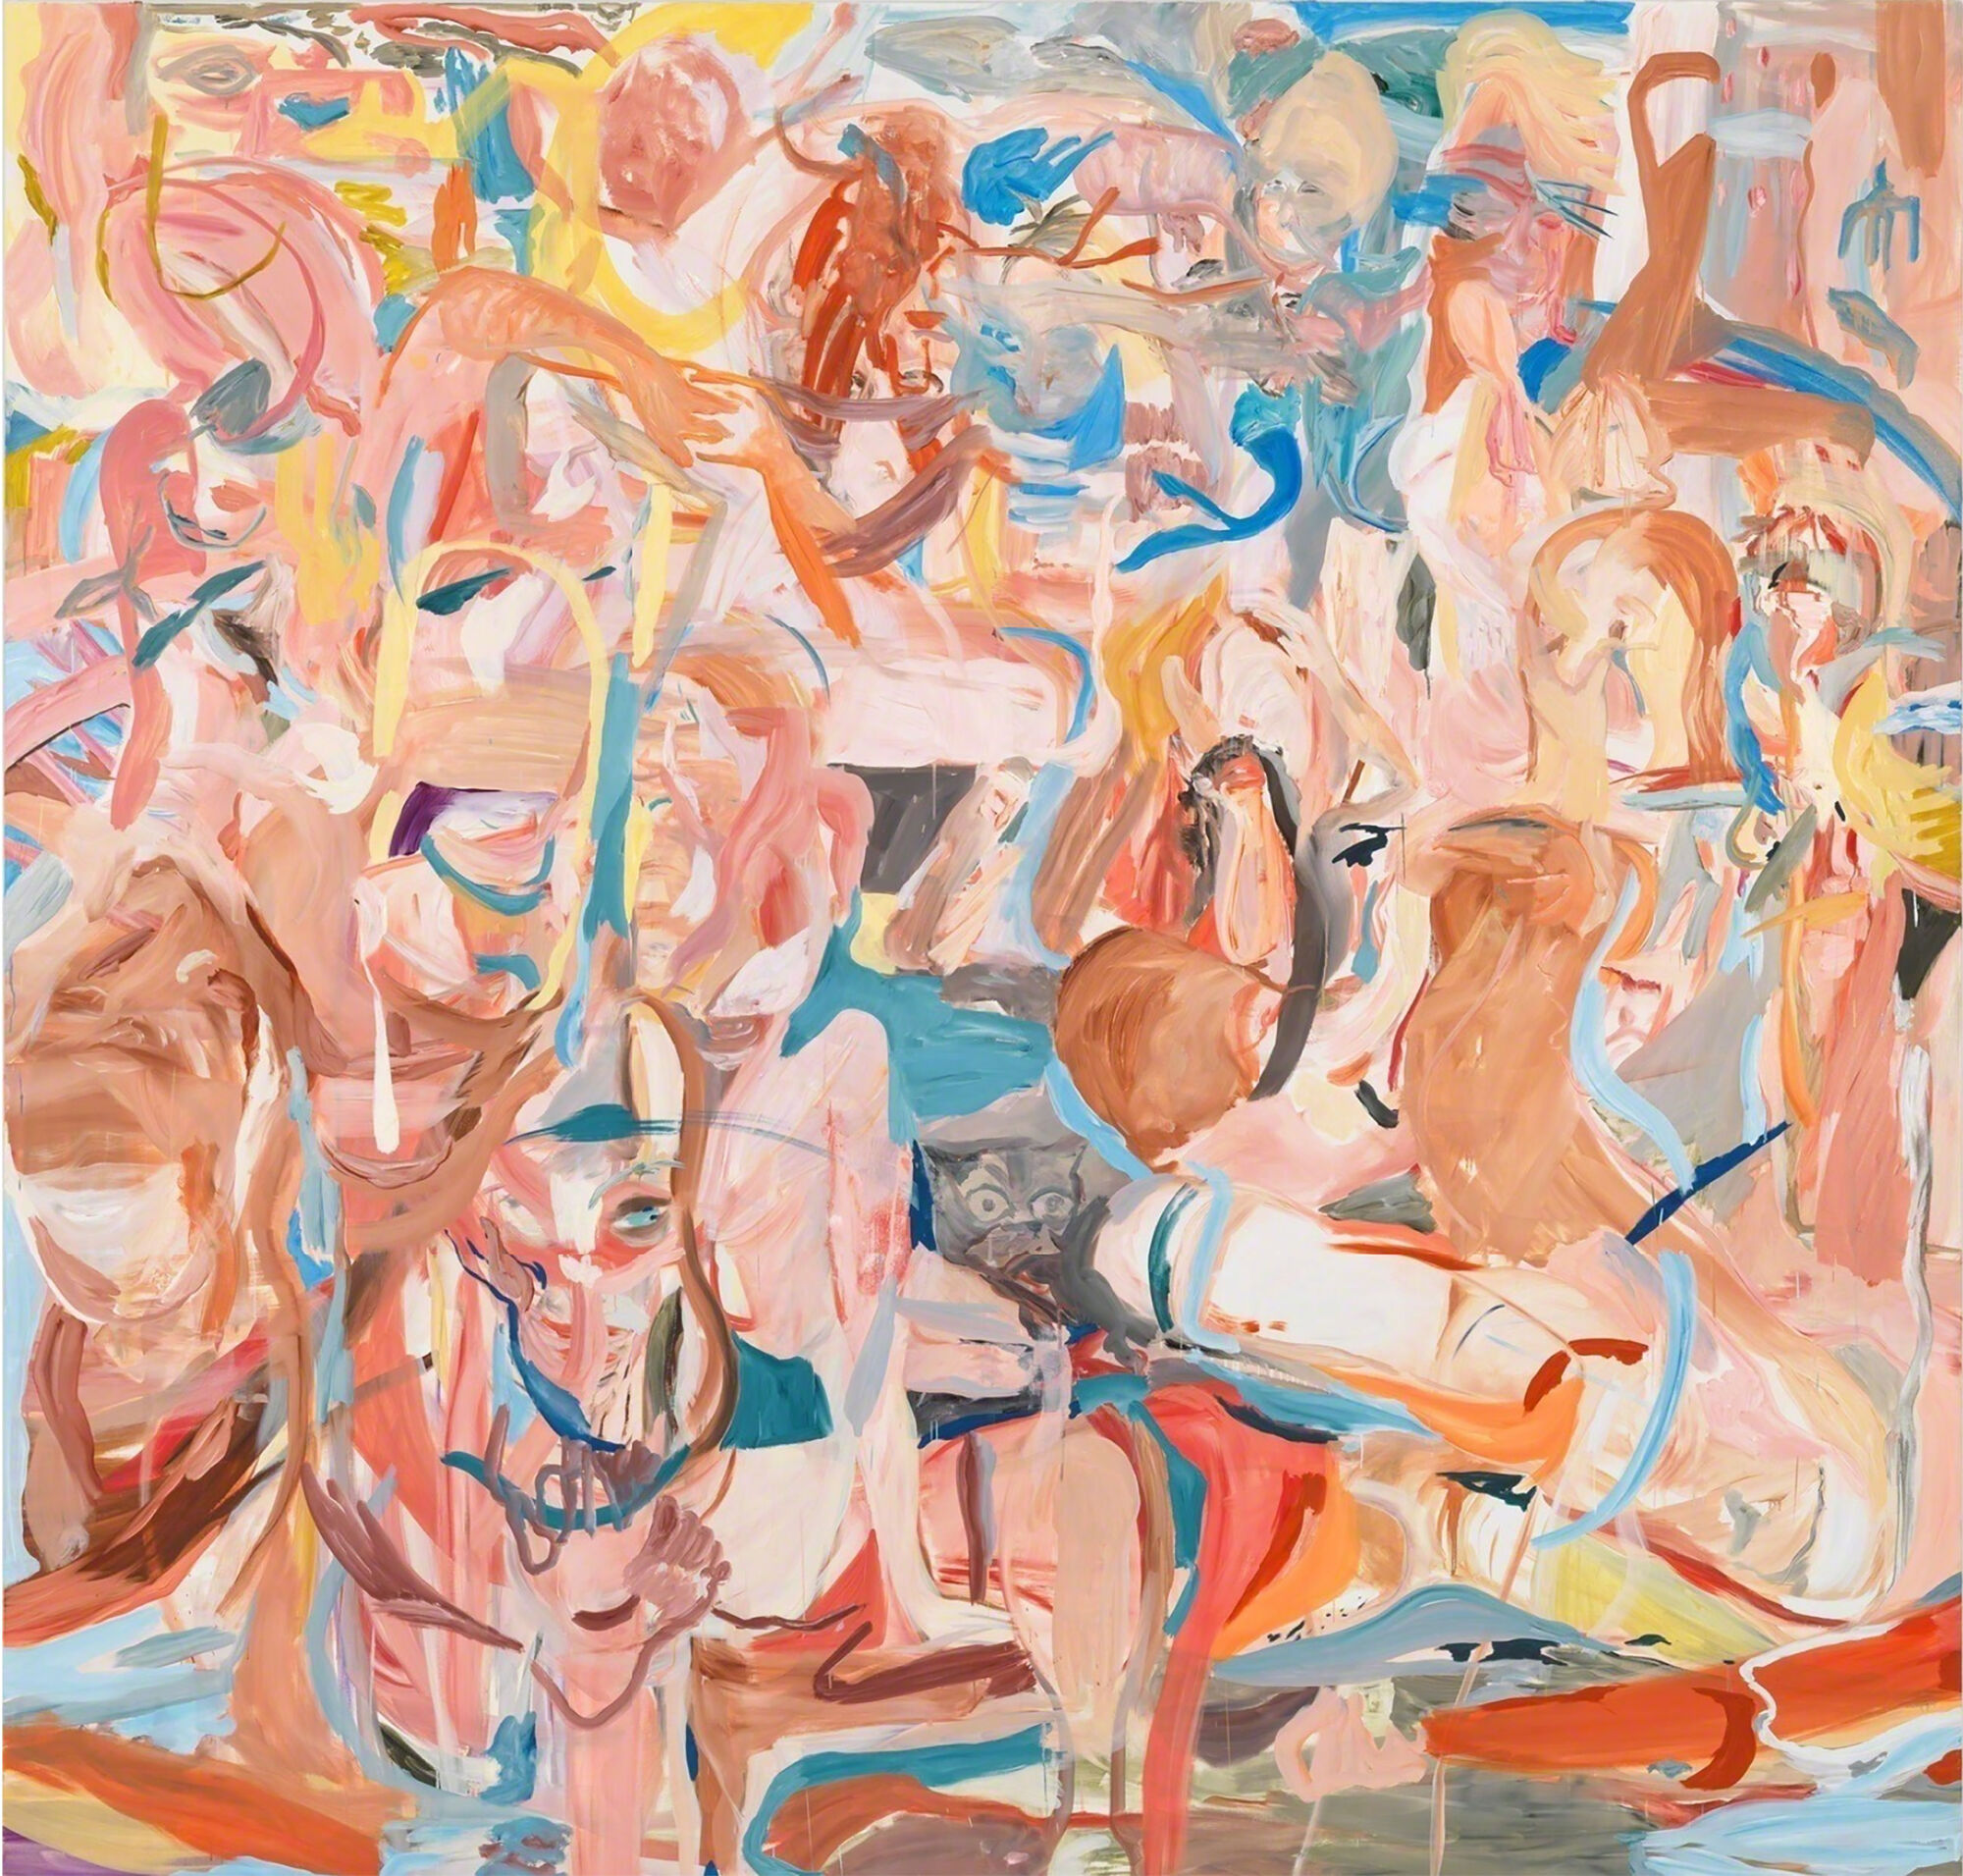 The Wick - Combing the Hair (Côte d'Azur), Cecily Brown, 2013